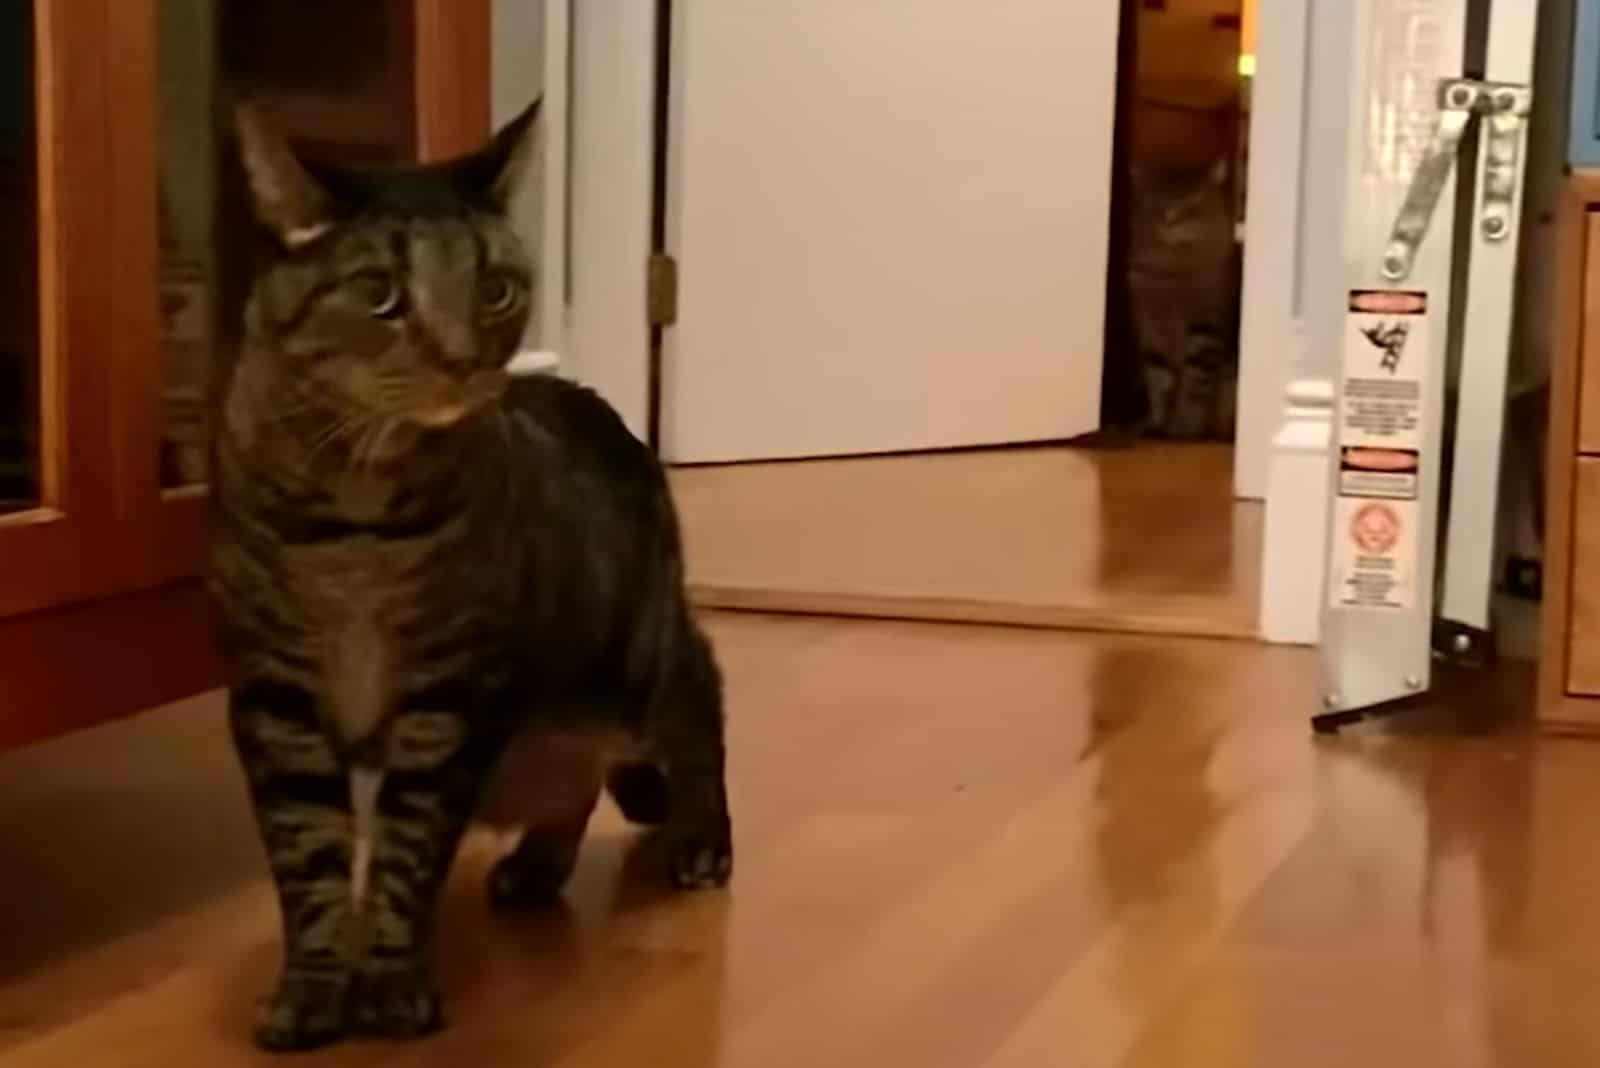 the cat stands on the laminate and looks around